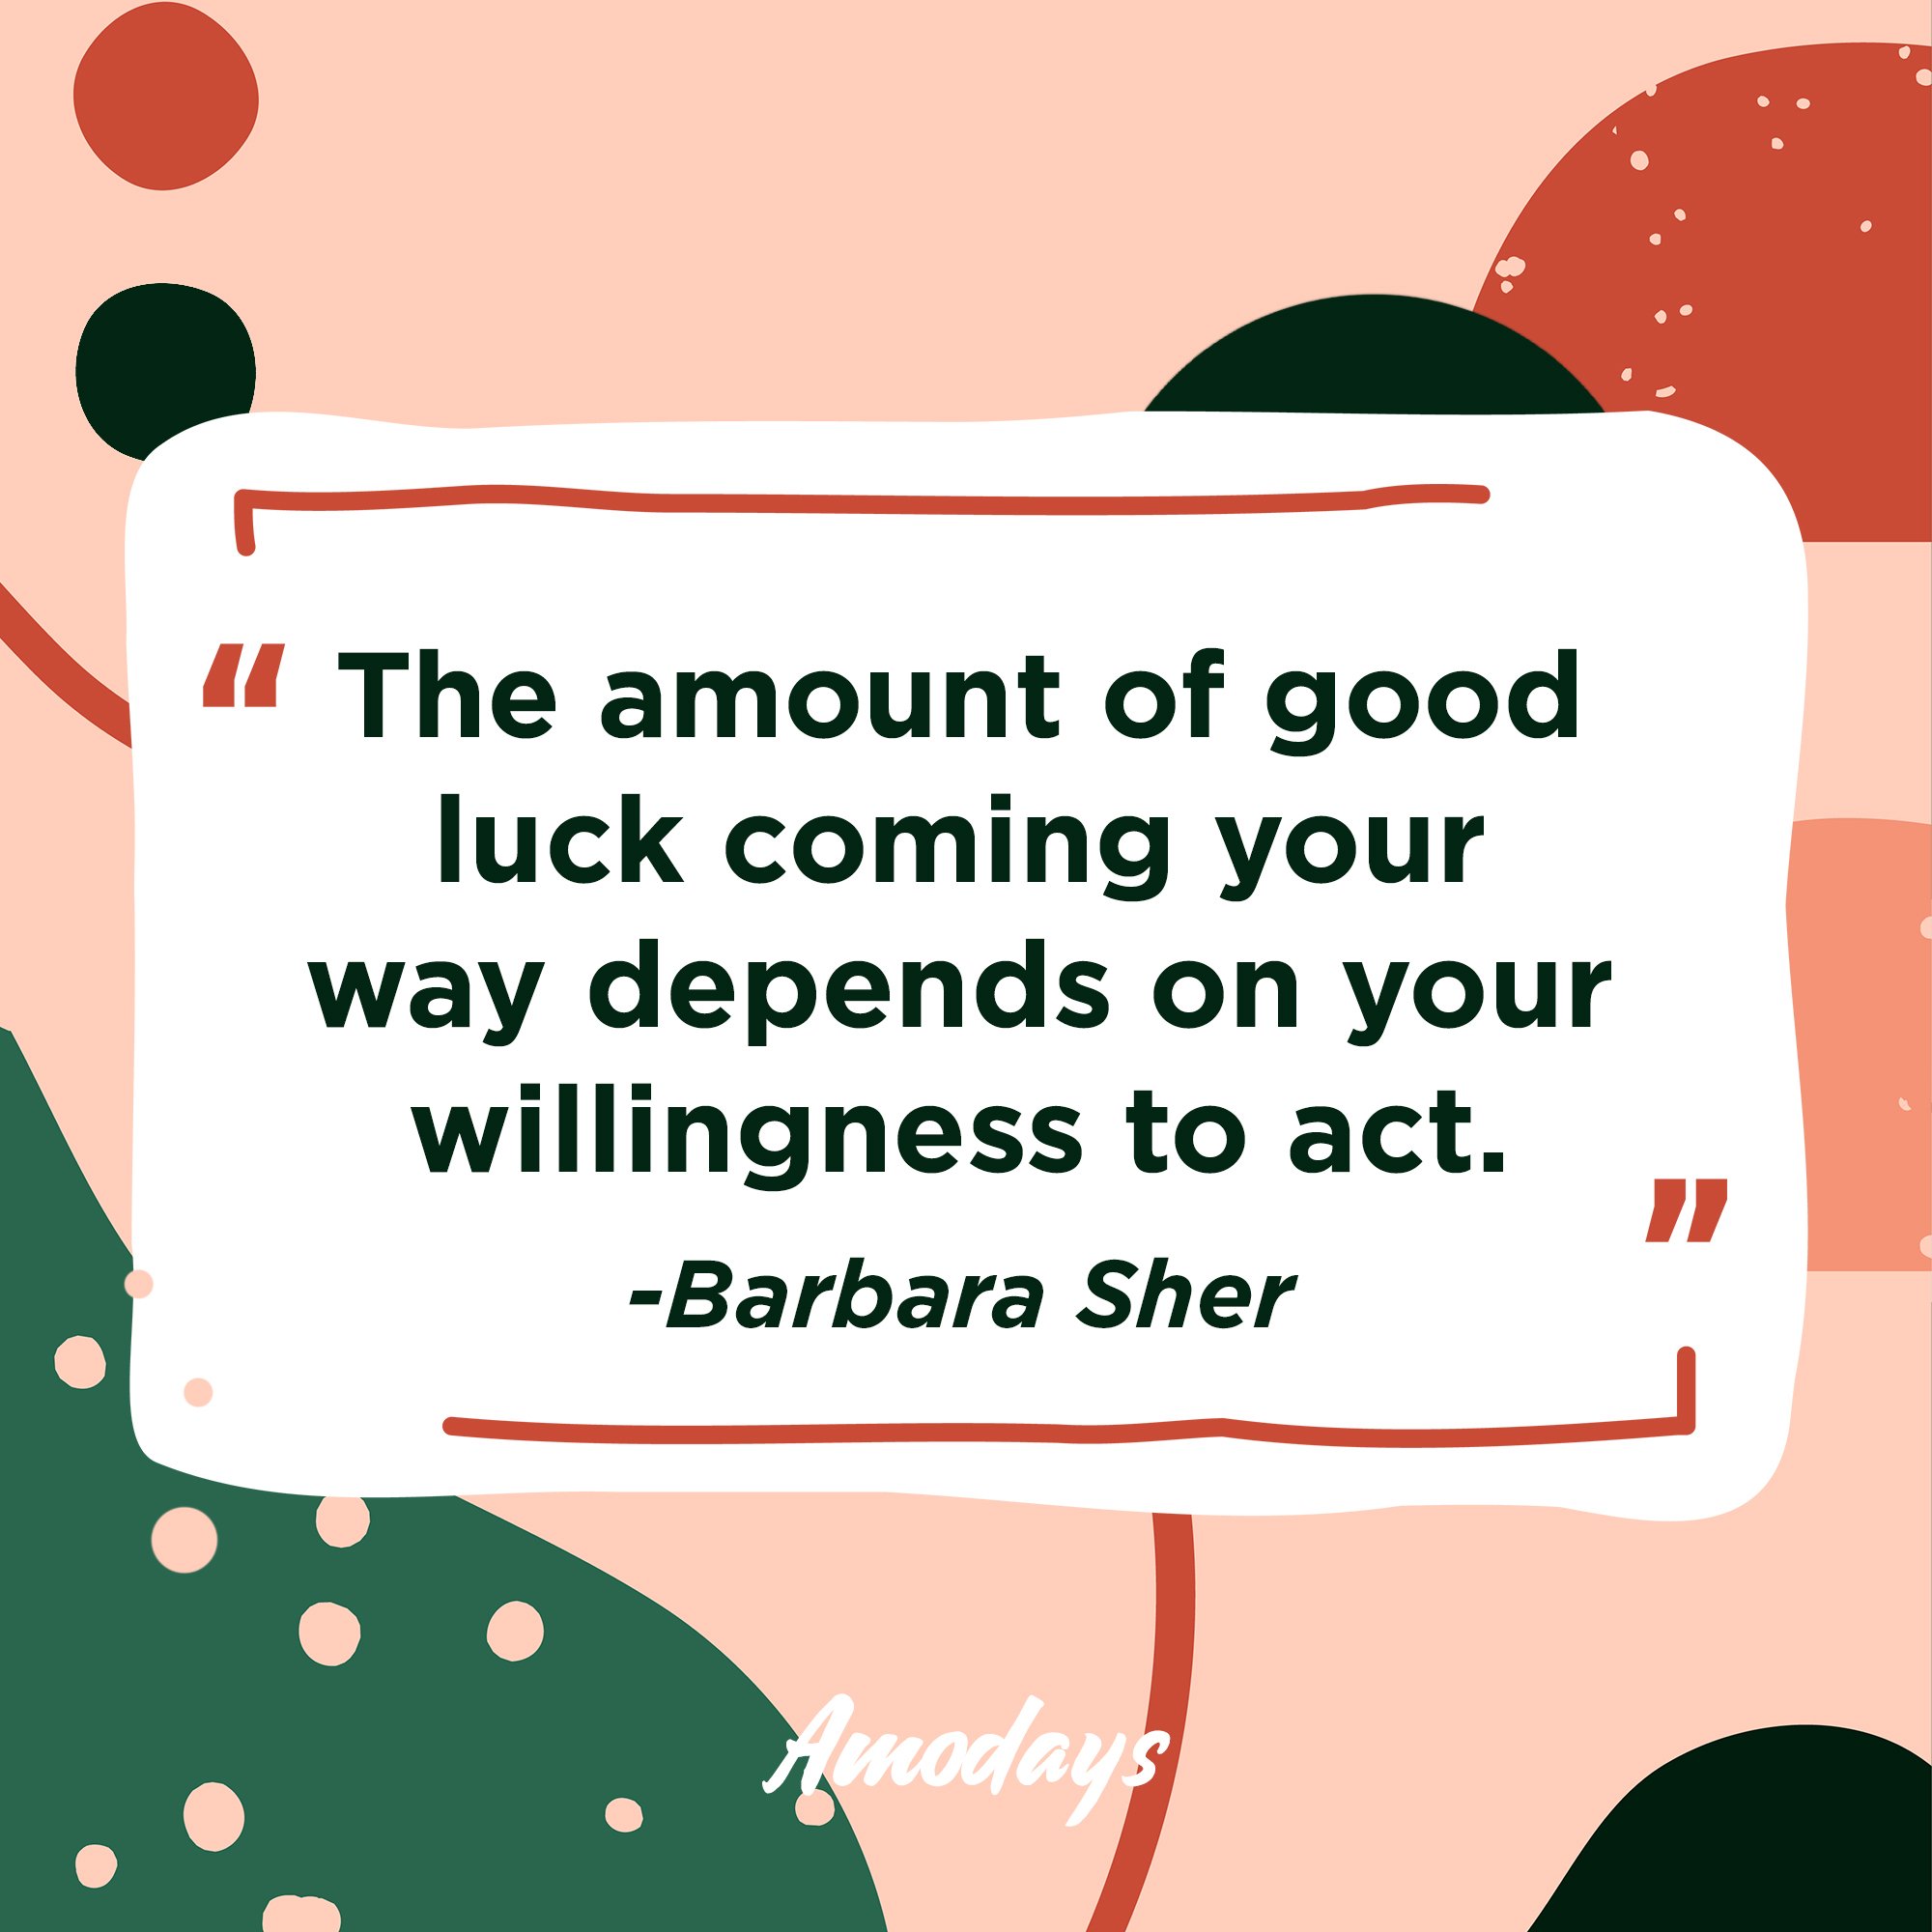 Barbara Sher's quote: "The amount of good luck coming your way depends on your willingness to act." | Image: AmoDays